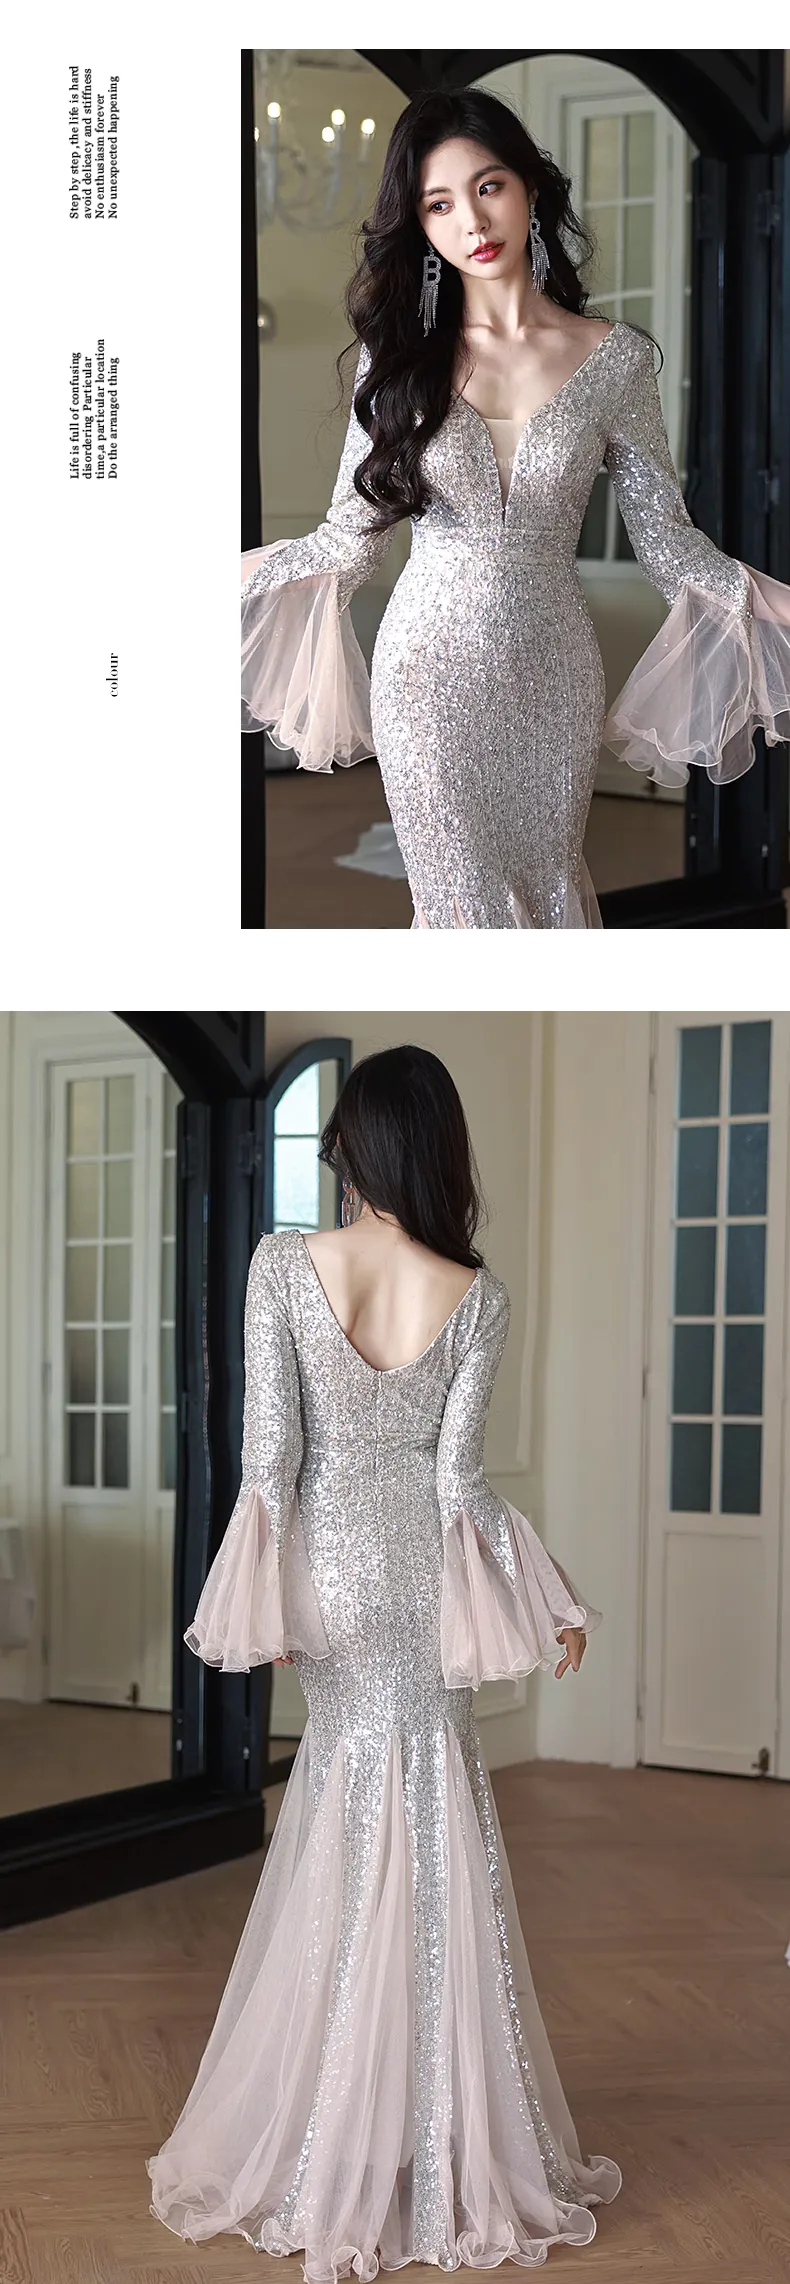 Ladies-Silver-V-neck-Fishtail-Evening-Dress-Banquet-Formal-Gown15